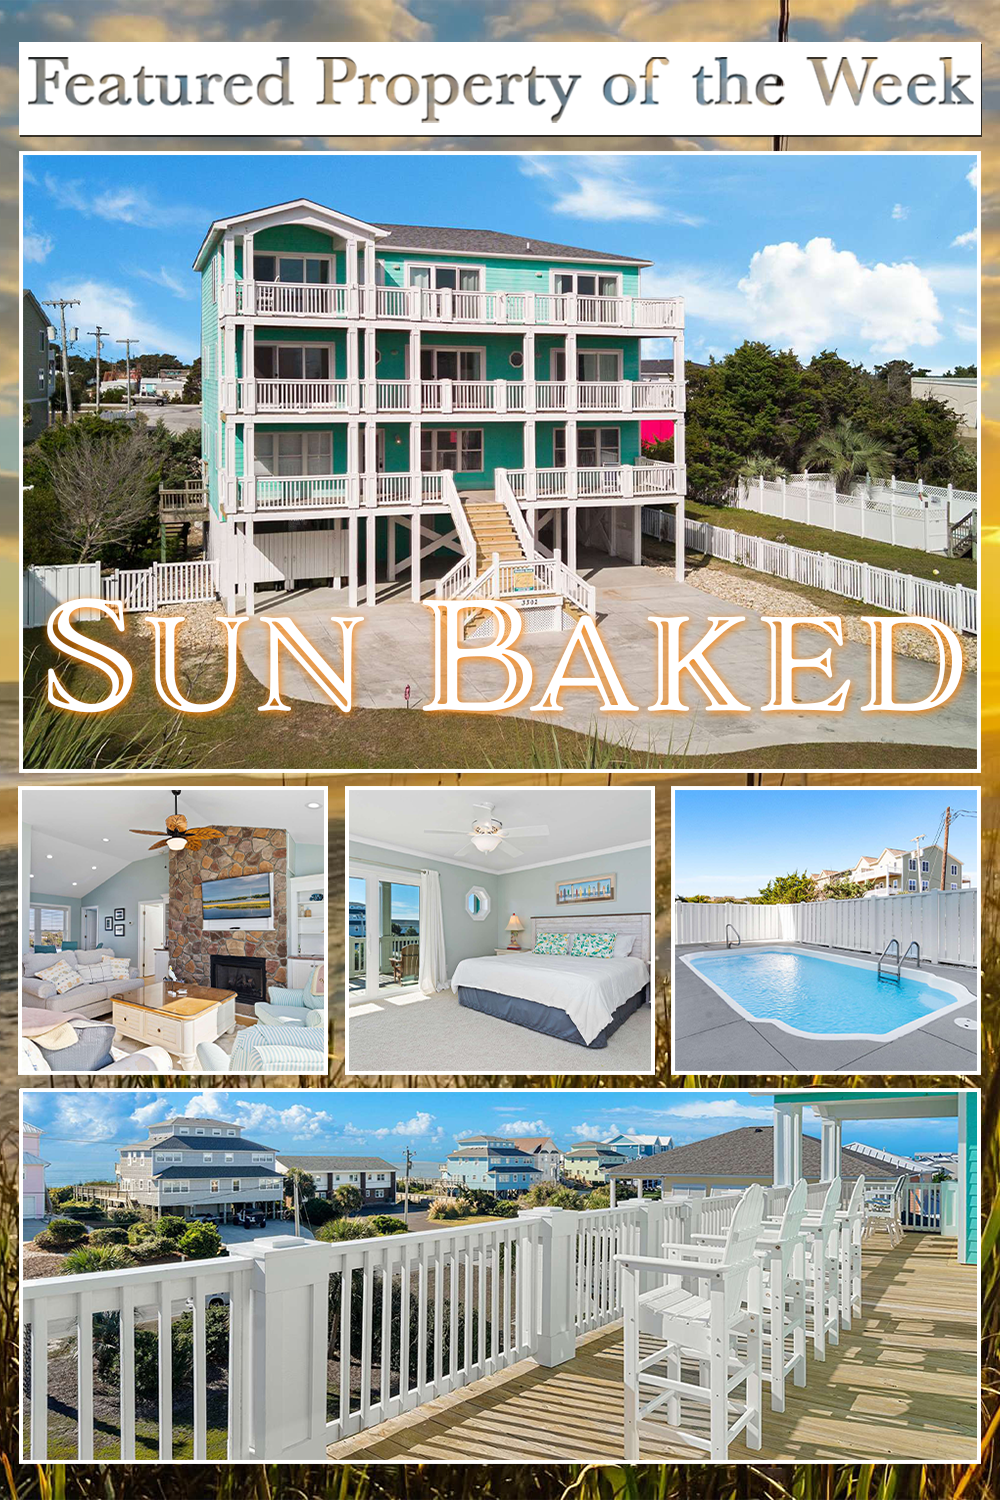 Sun Baked | Emerald Isle Realty Featured Property of the Week